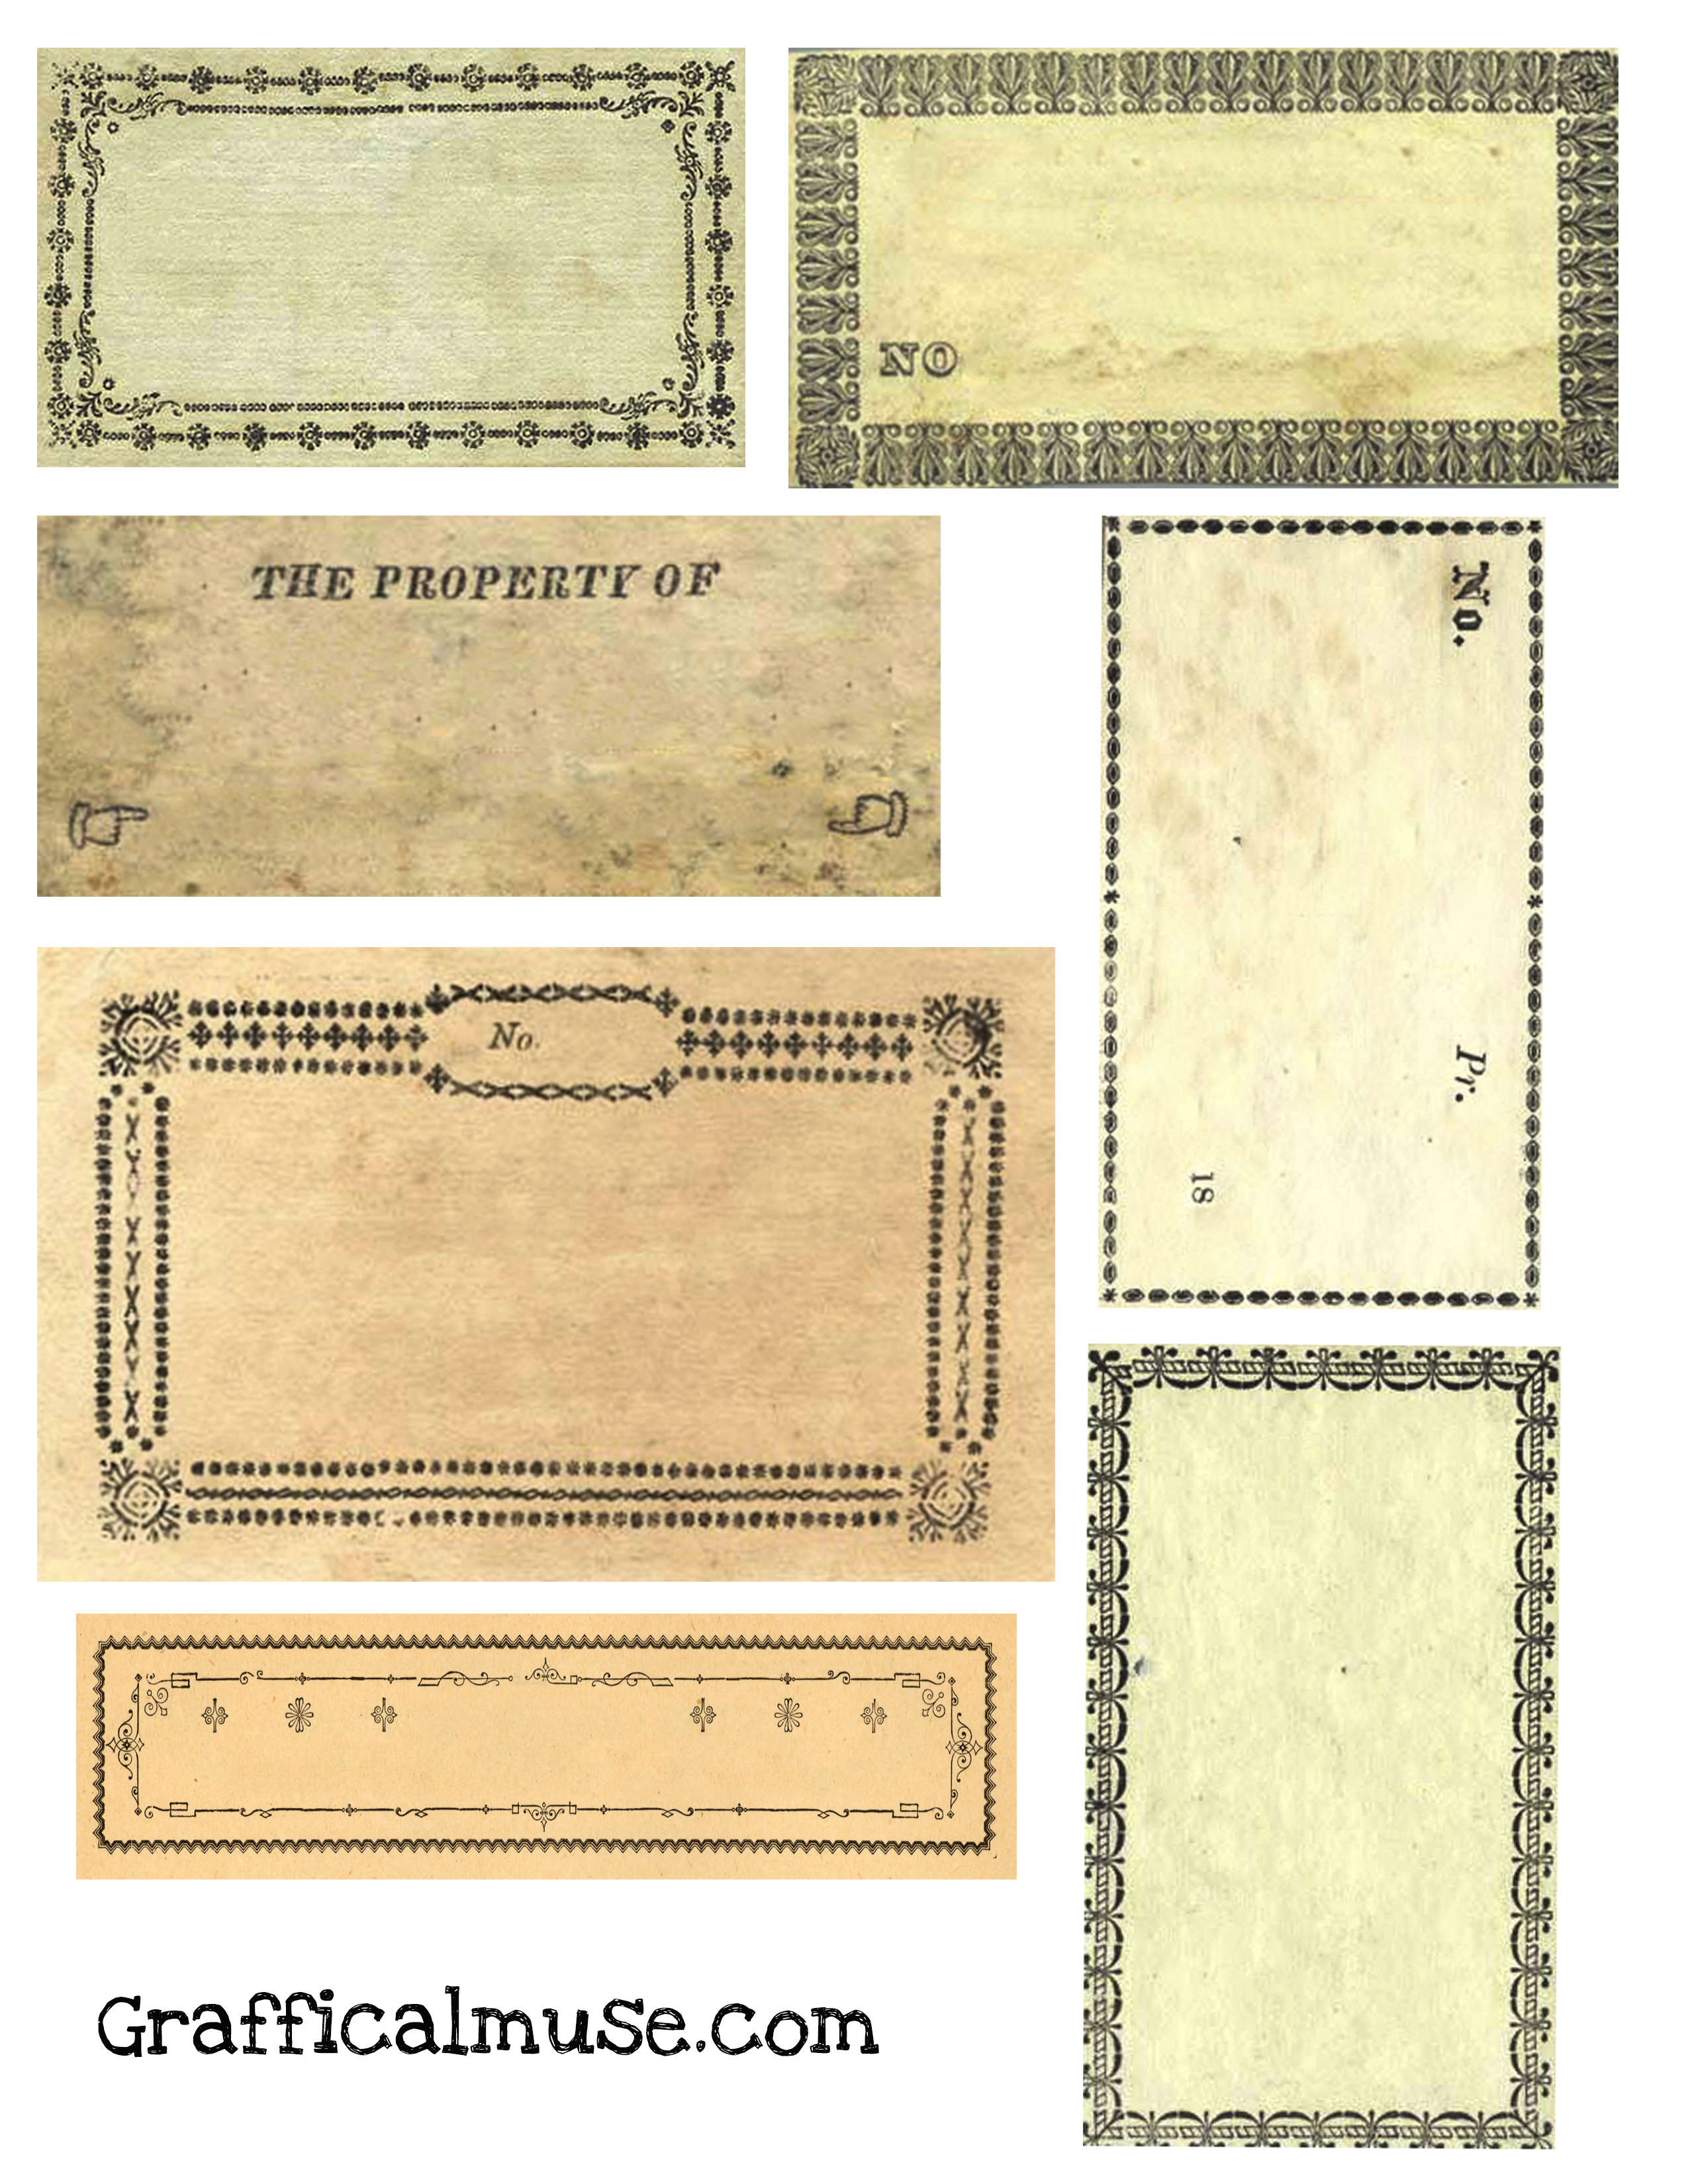 Free Vintage Labels From Victorian Era Collage Sheet The Graffical Muse